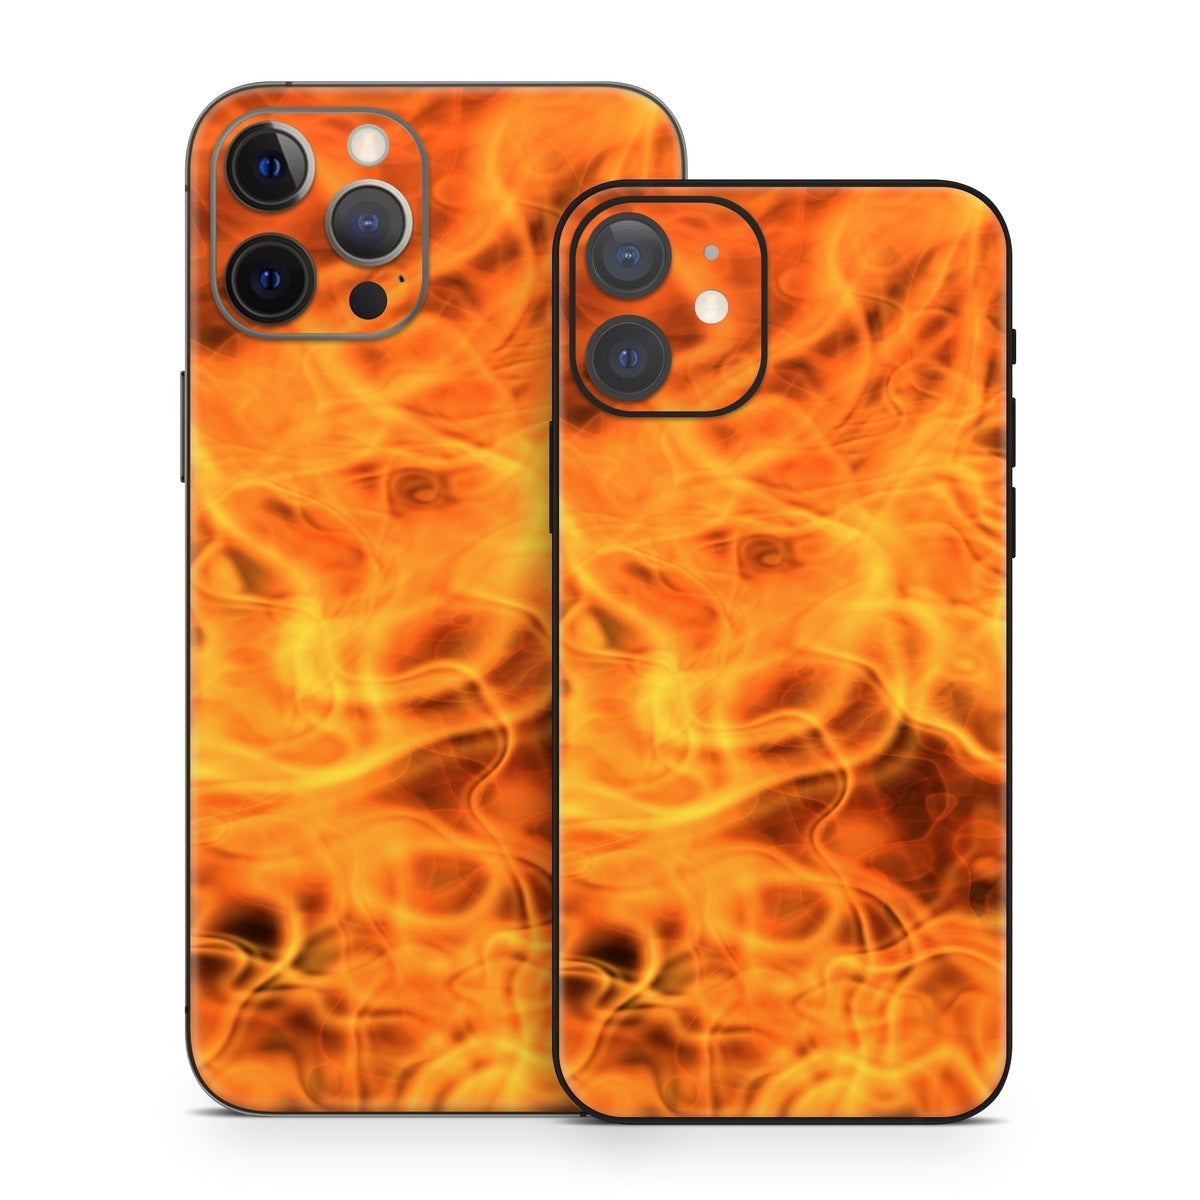 Combustion - Apple iPhone 12 Skin